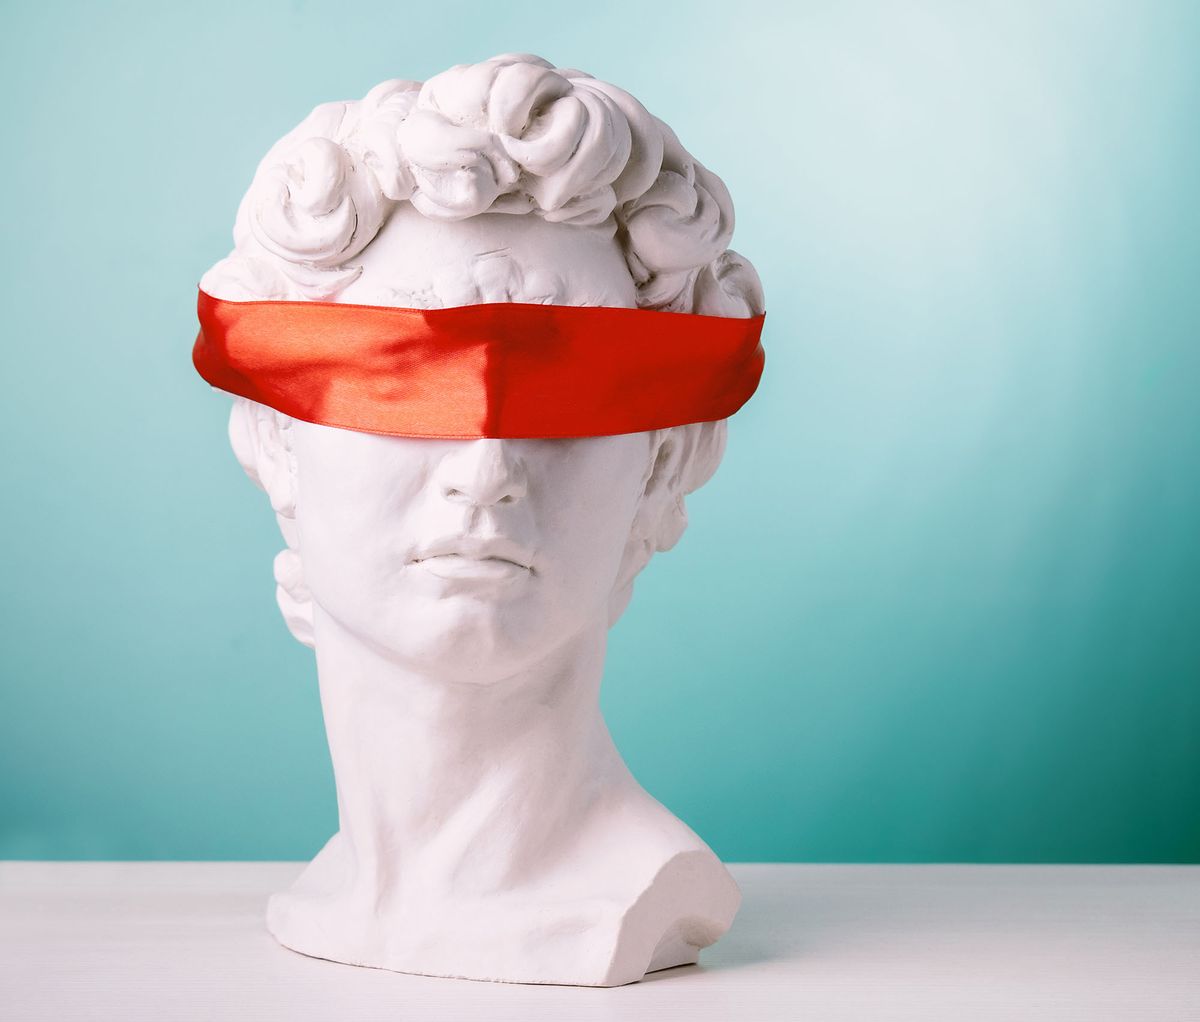 Plaster,Head,With,Eyes,Covered,Red,Satin,Ribbon,On,BluePlaster head with eyes covered red satin ribbon on blue background. Avoid problems concept.